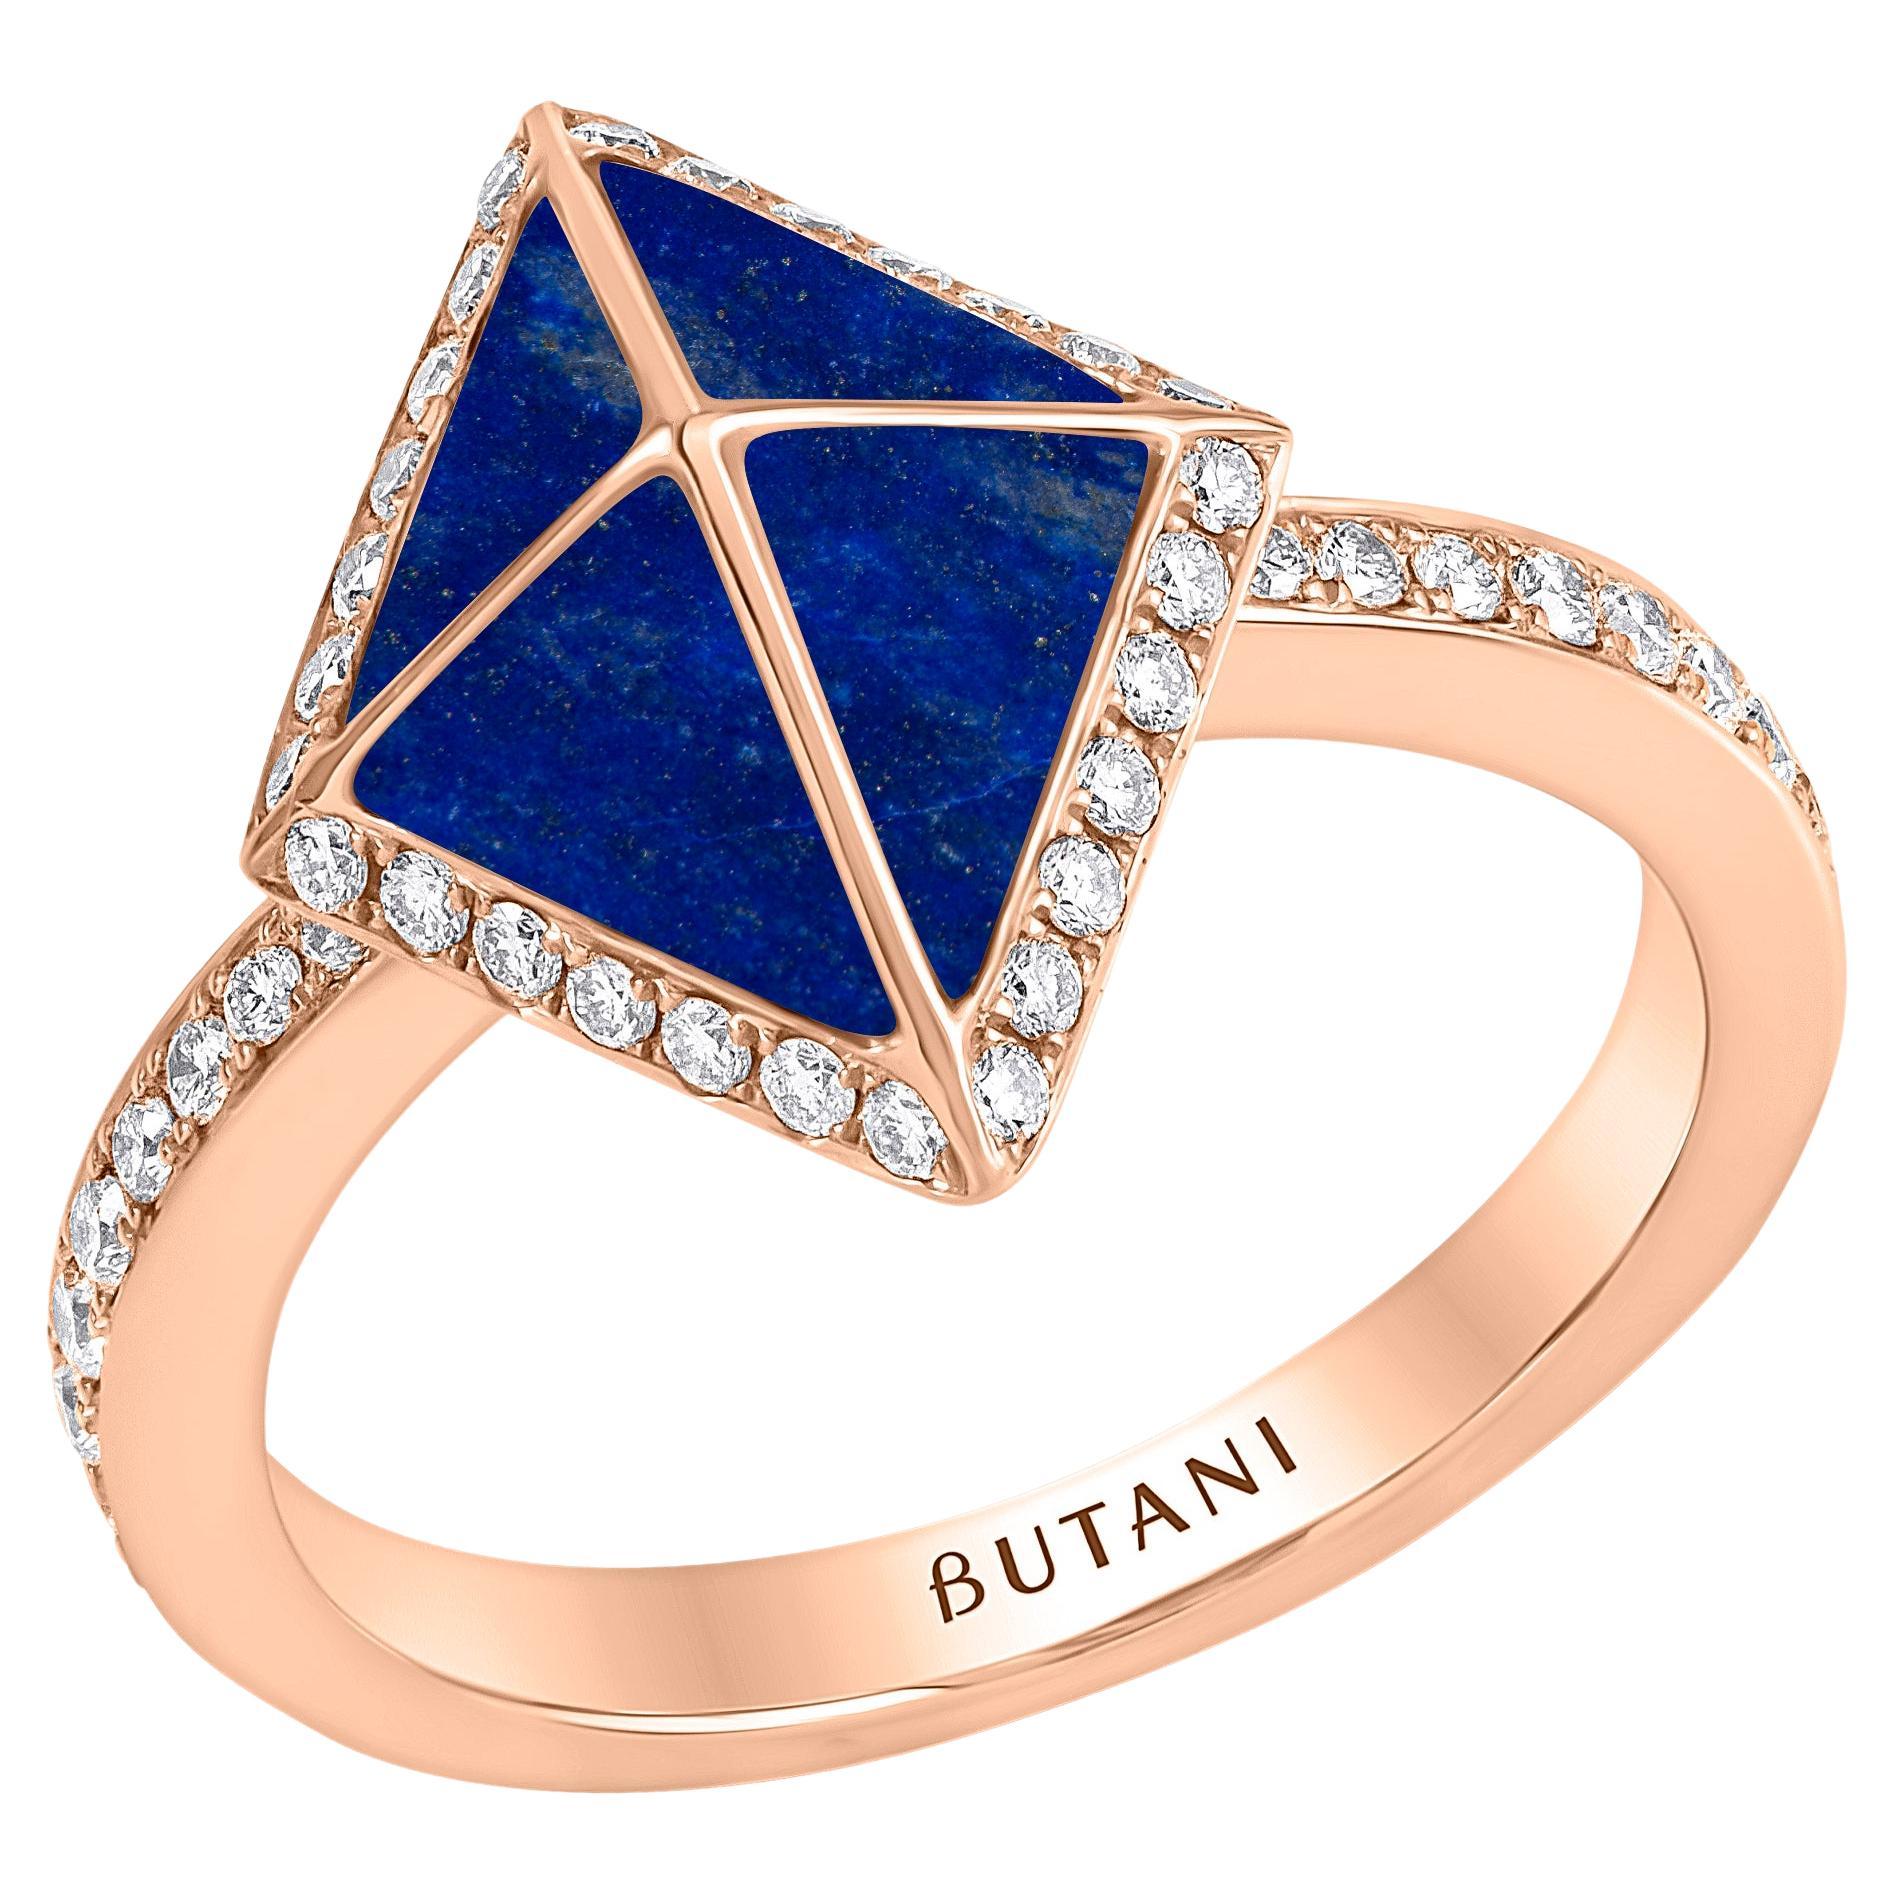 Tetra Zenith Ring with Lapis Lazuli and Diamonds in 18k Rose Gold